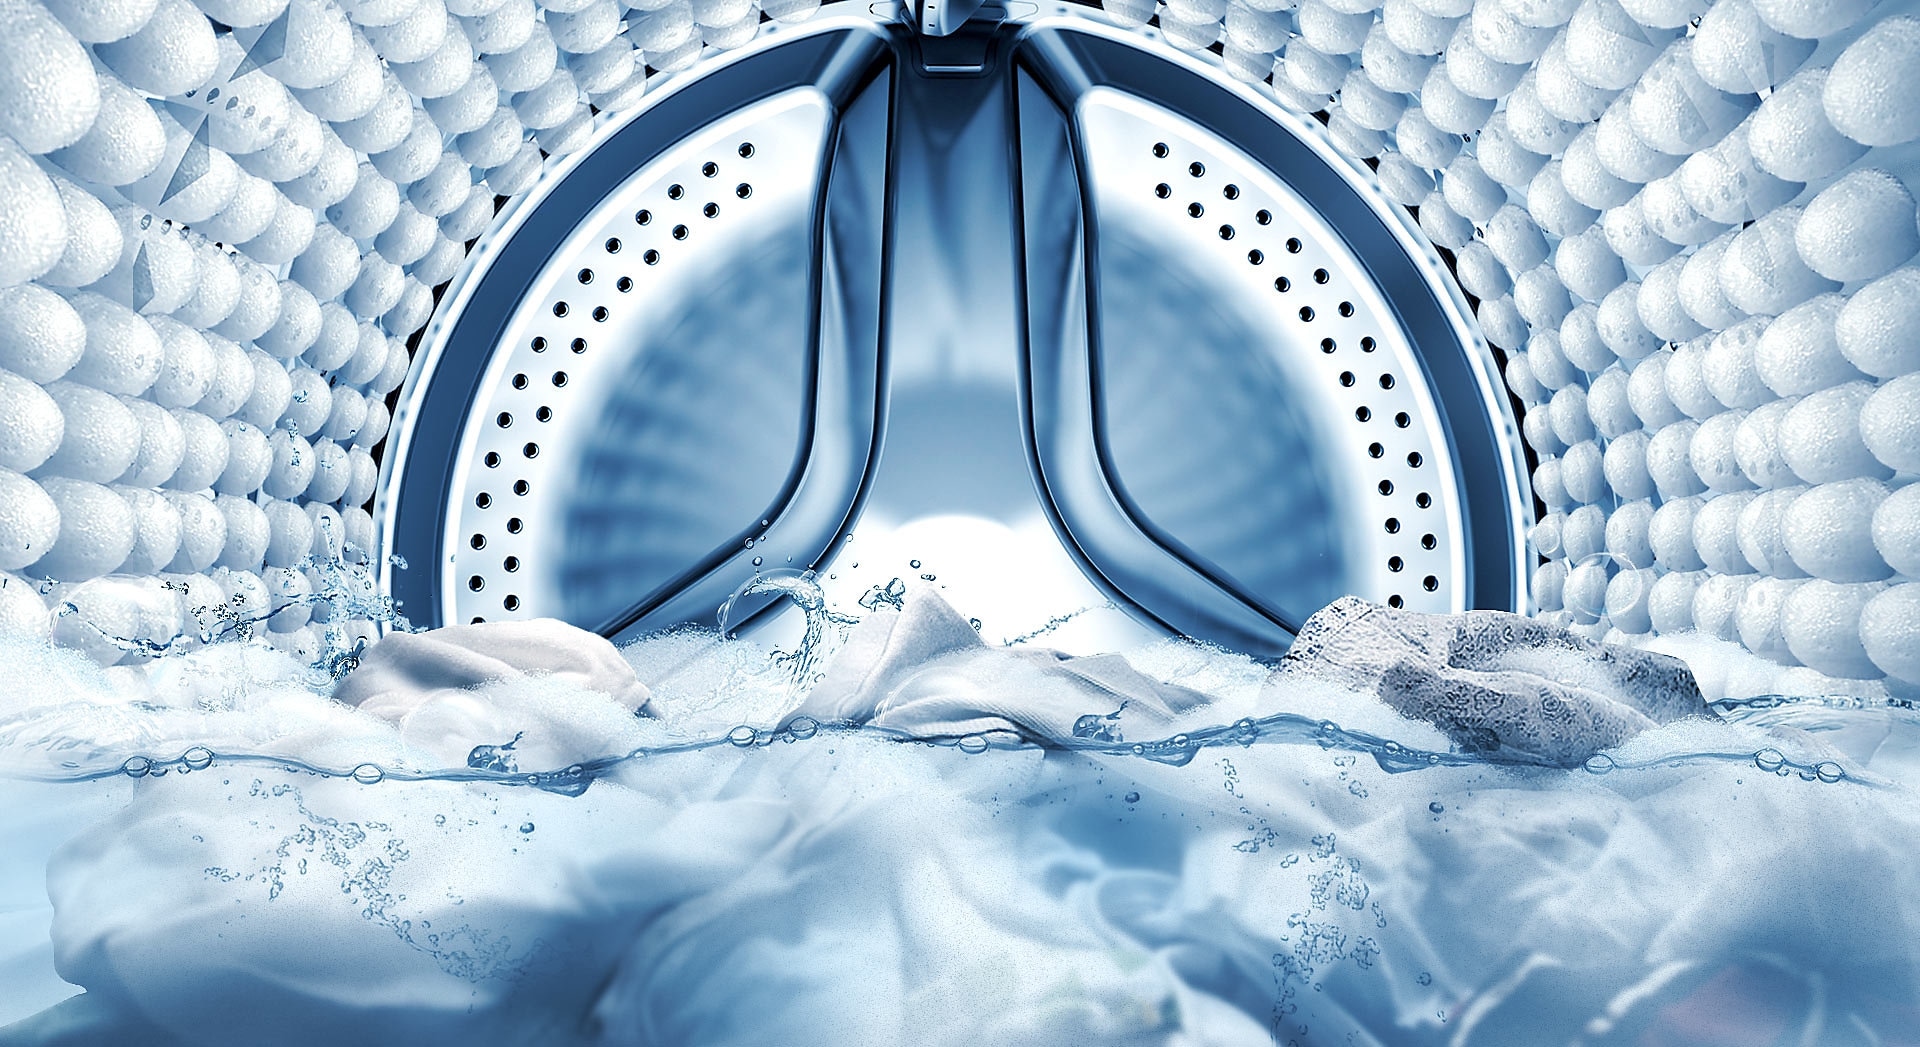  An image showing the inside of the machine's drum, as the bubble soak function removes stains from clothes.